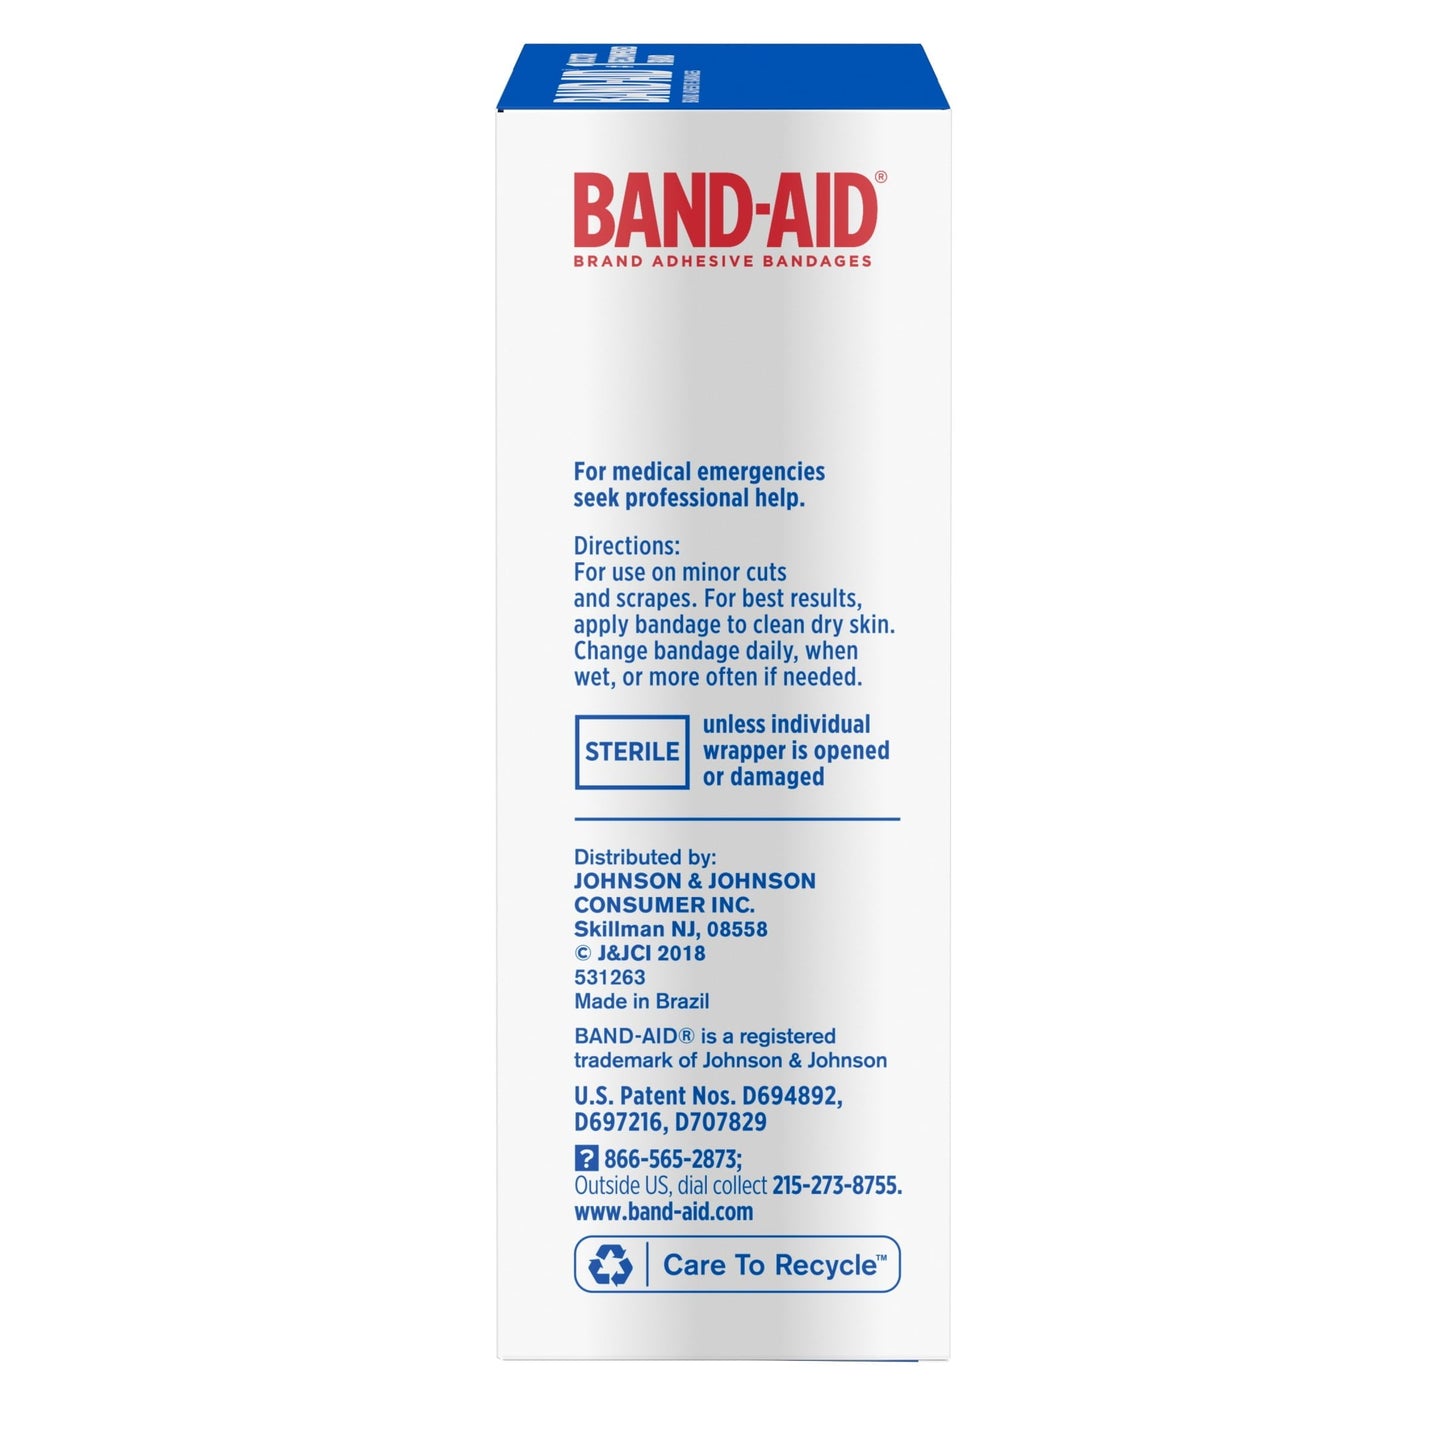 Band-Aid Brand Flexible Fabric Adhesive Bandages, Assorted, 30Ct